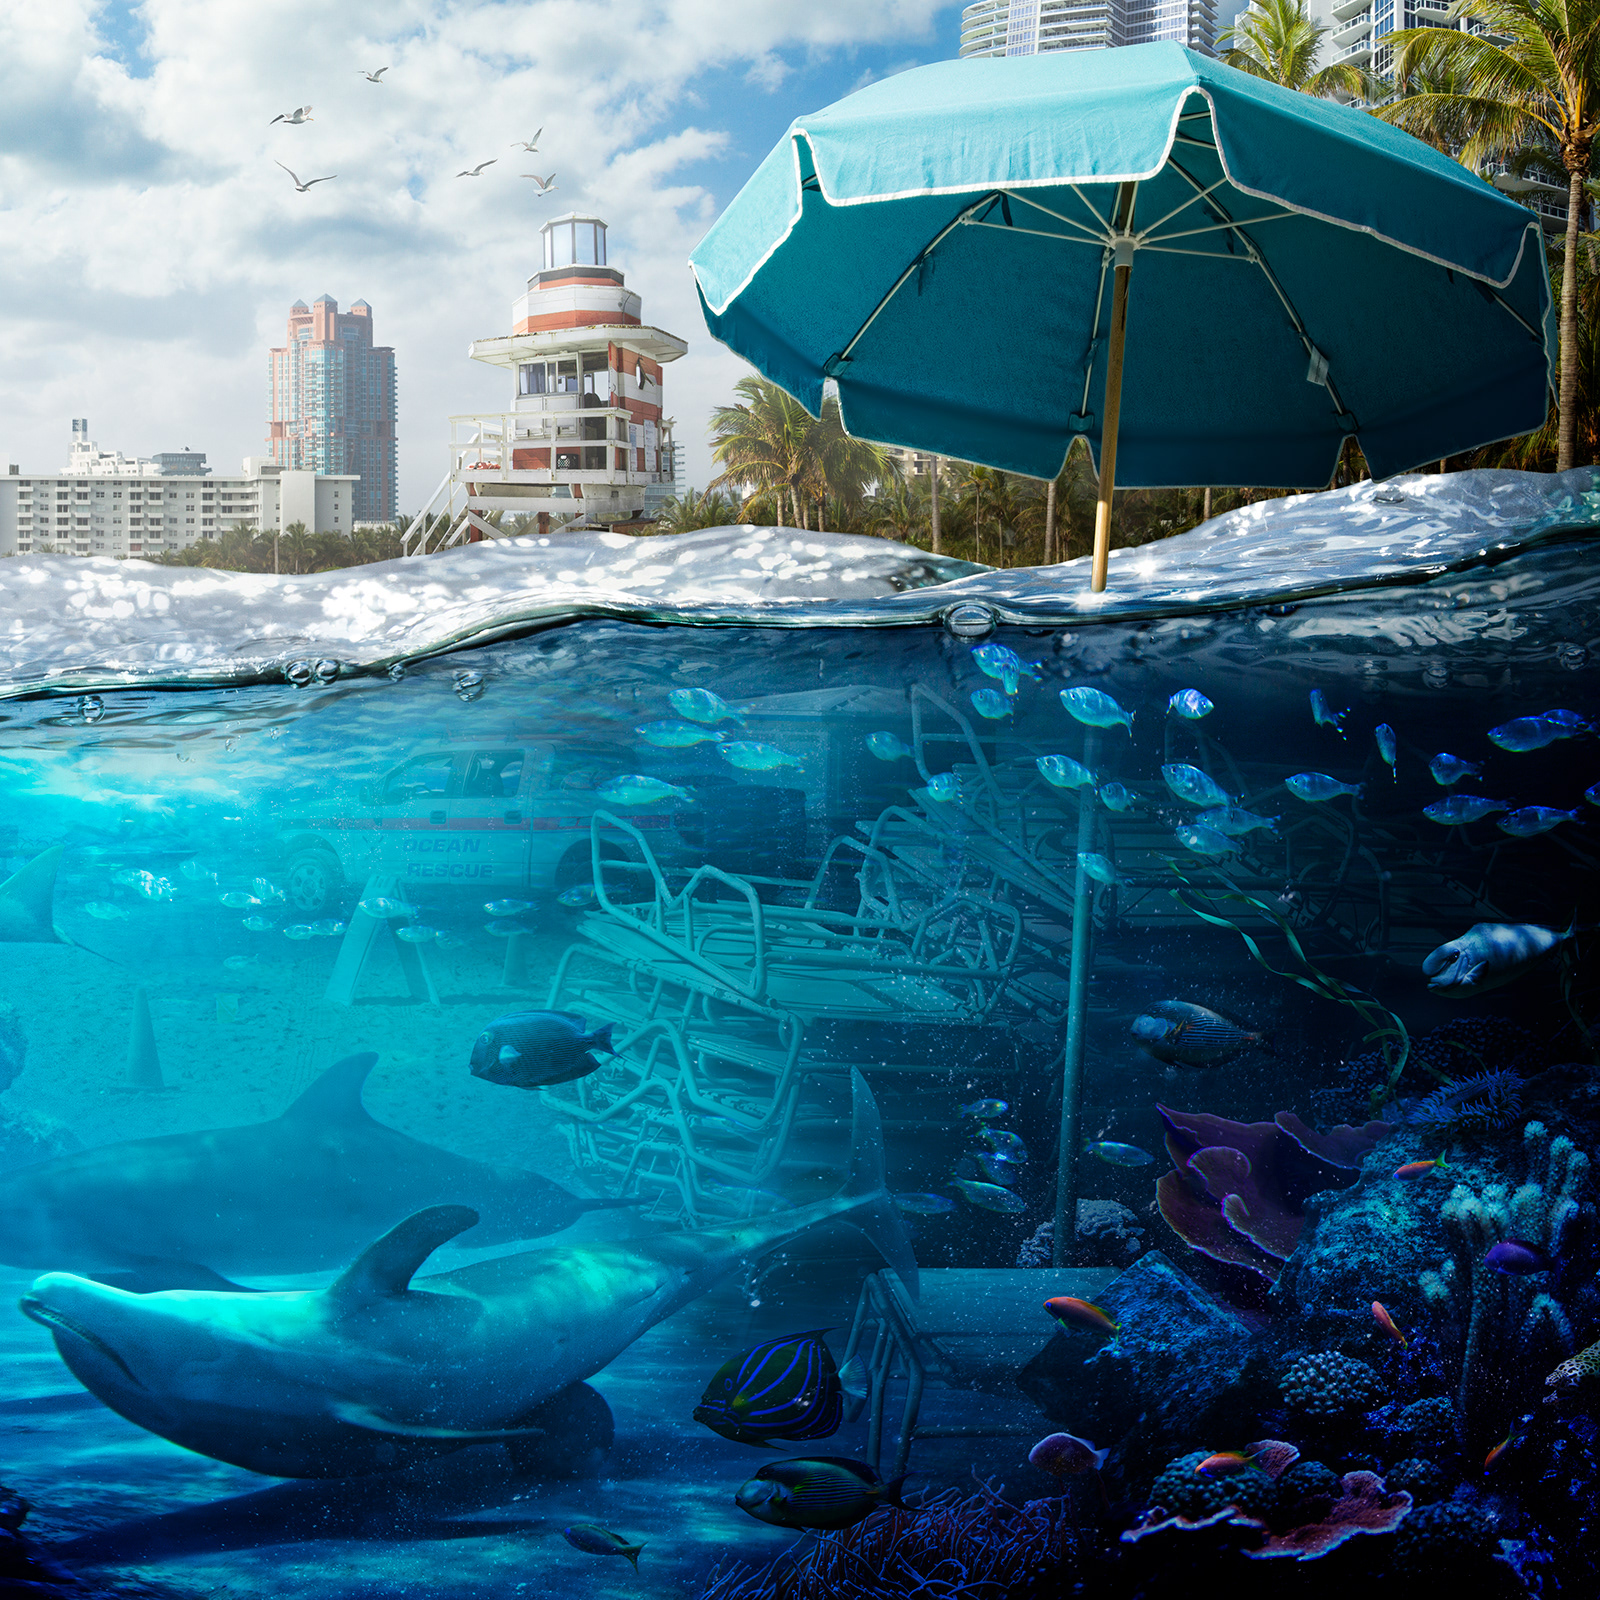 Floating World, a Photoshop project on the impacts of climate change